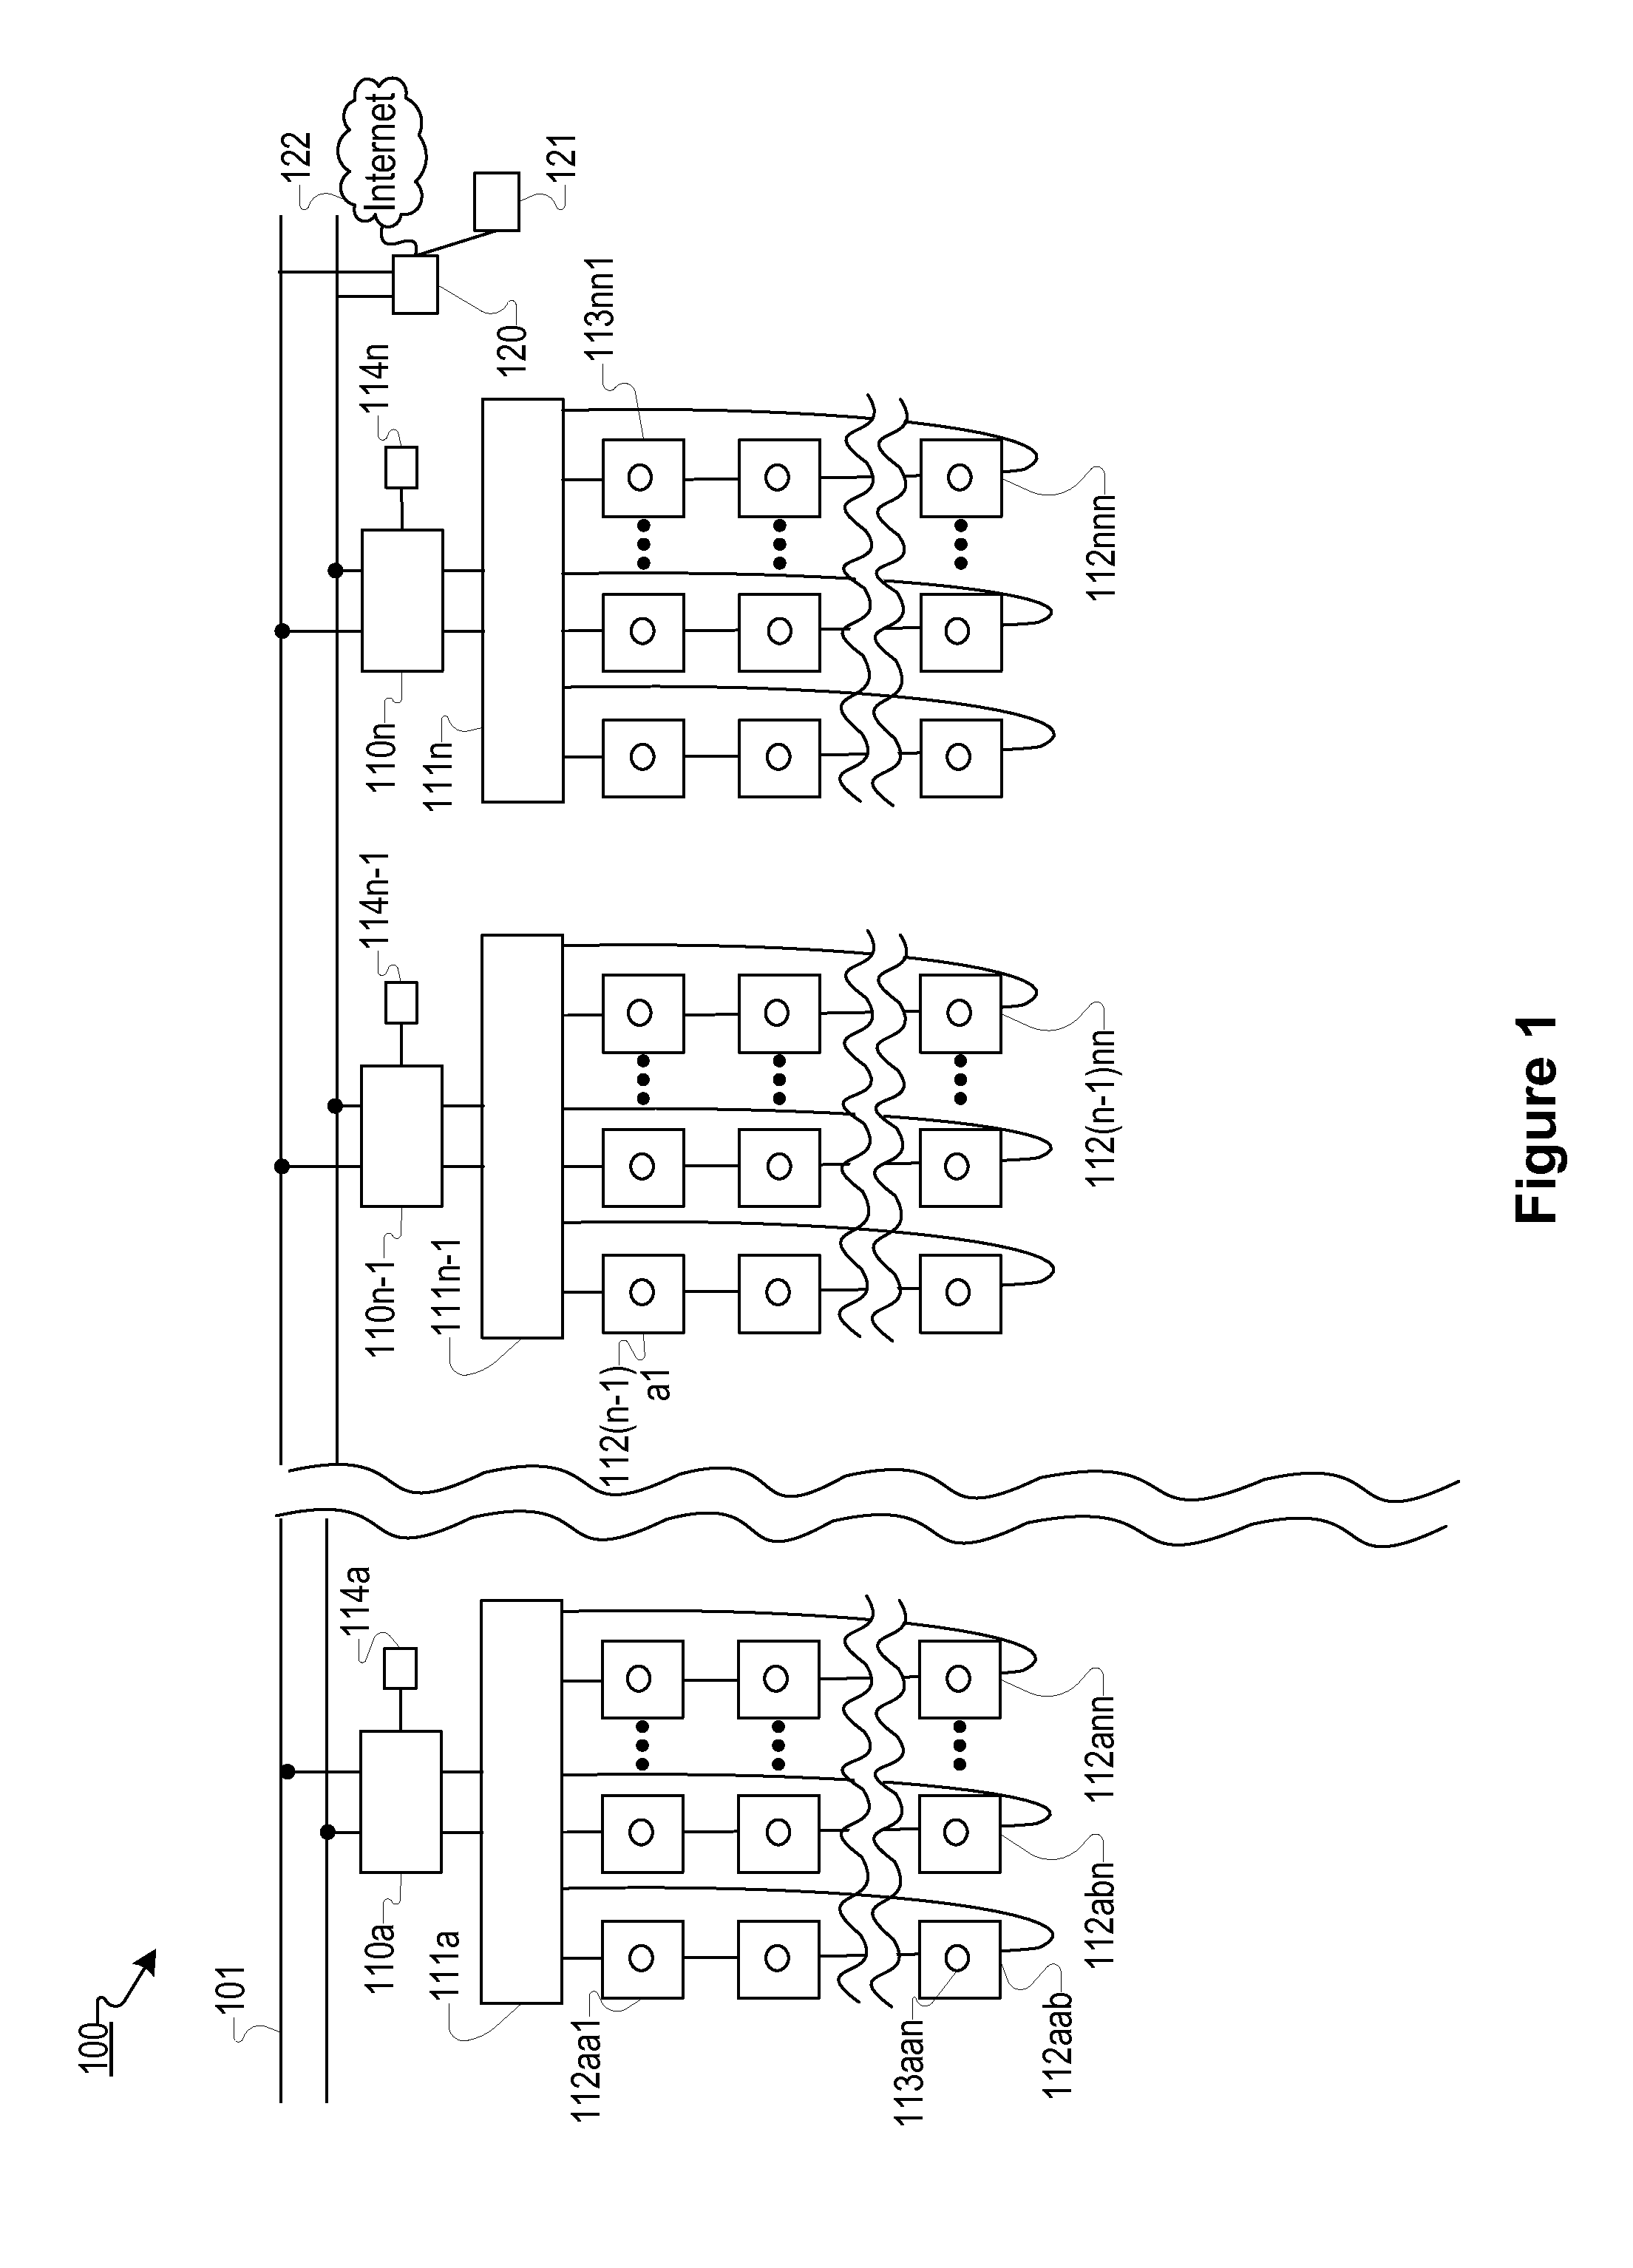 Systems and Methods for Mapping the Connectivity Topology of Local Management Units in Photovoltaic Arrays